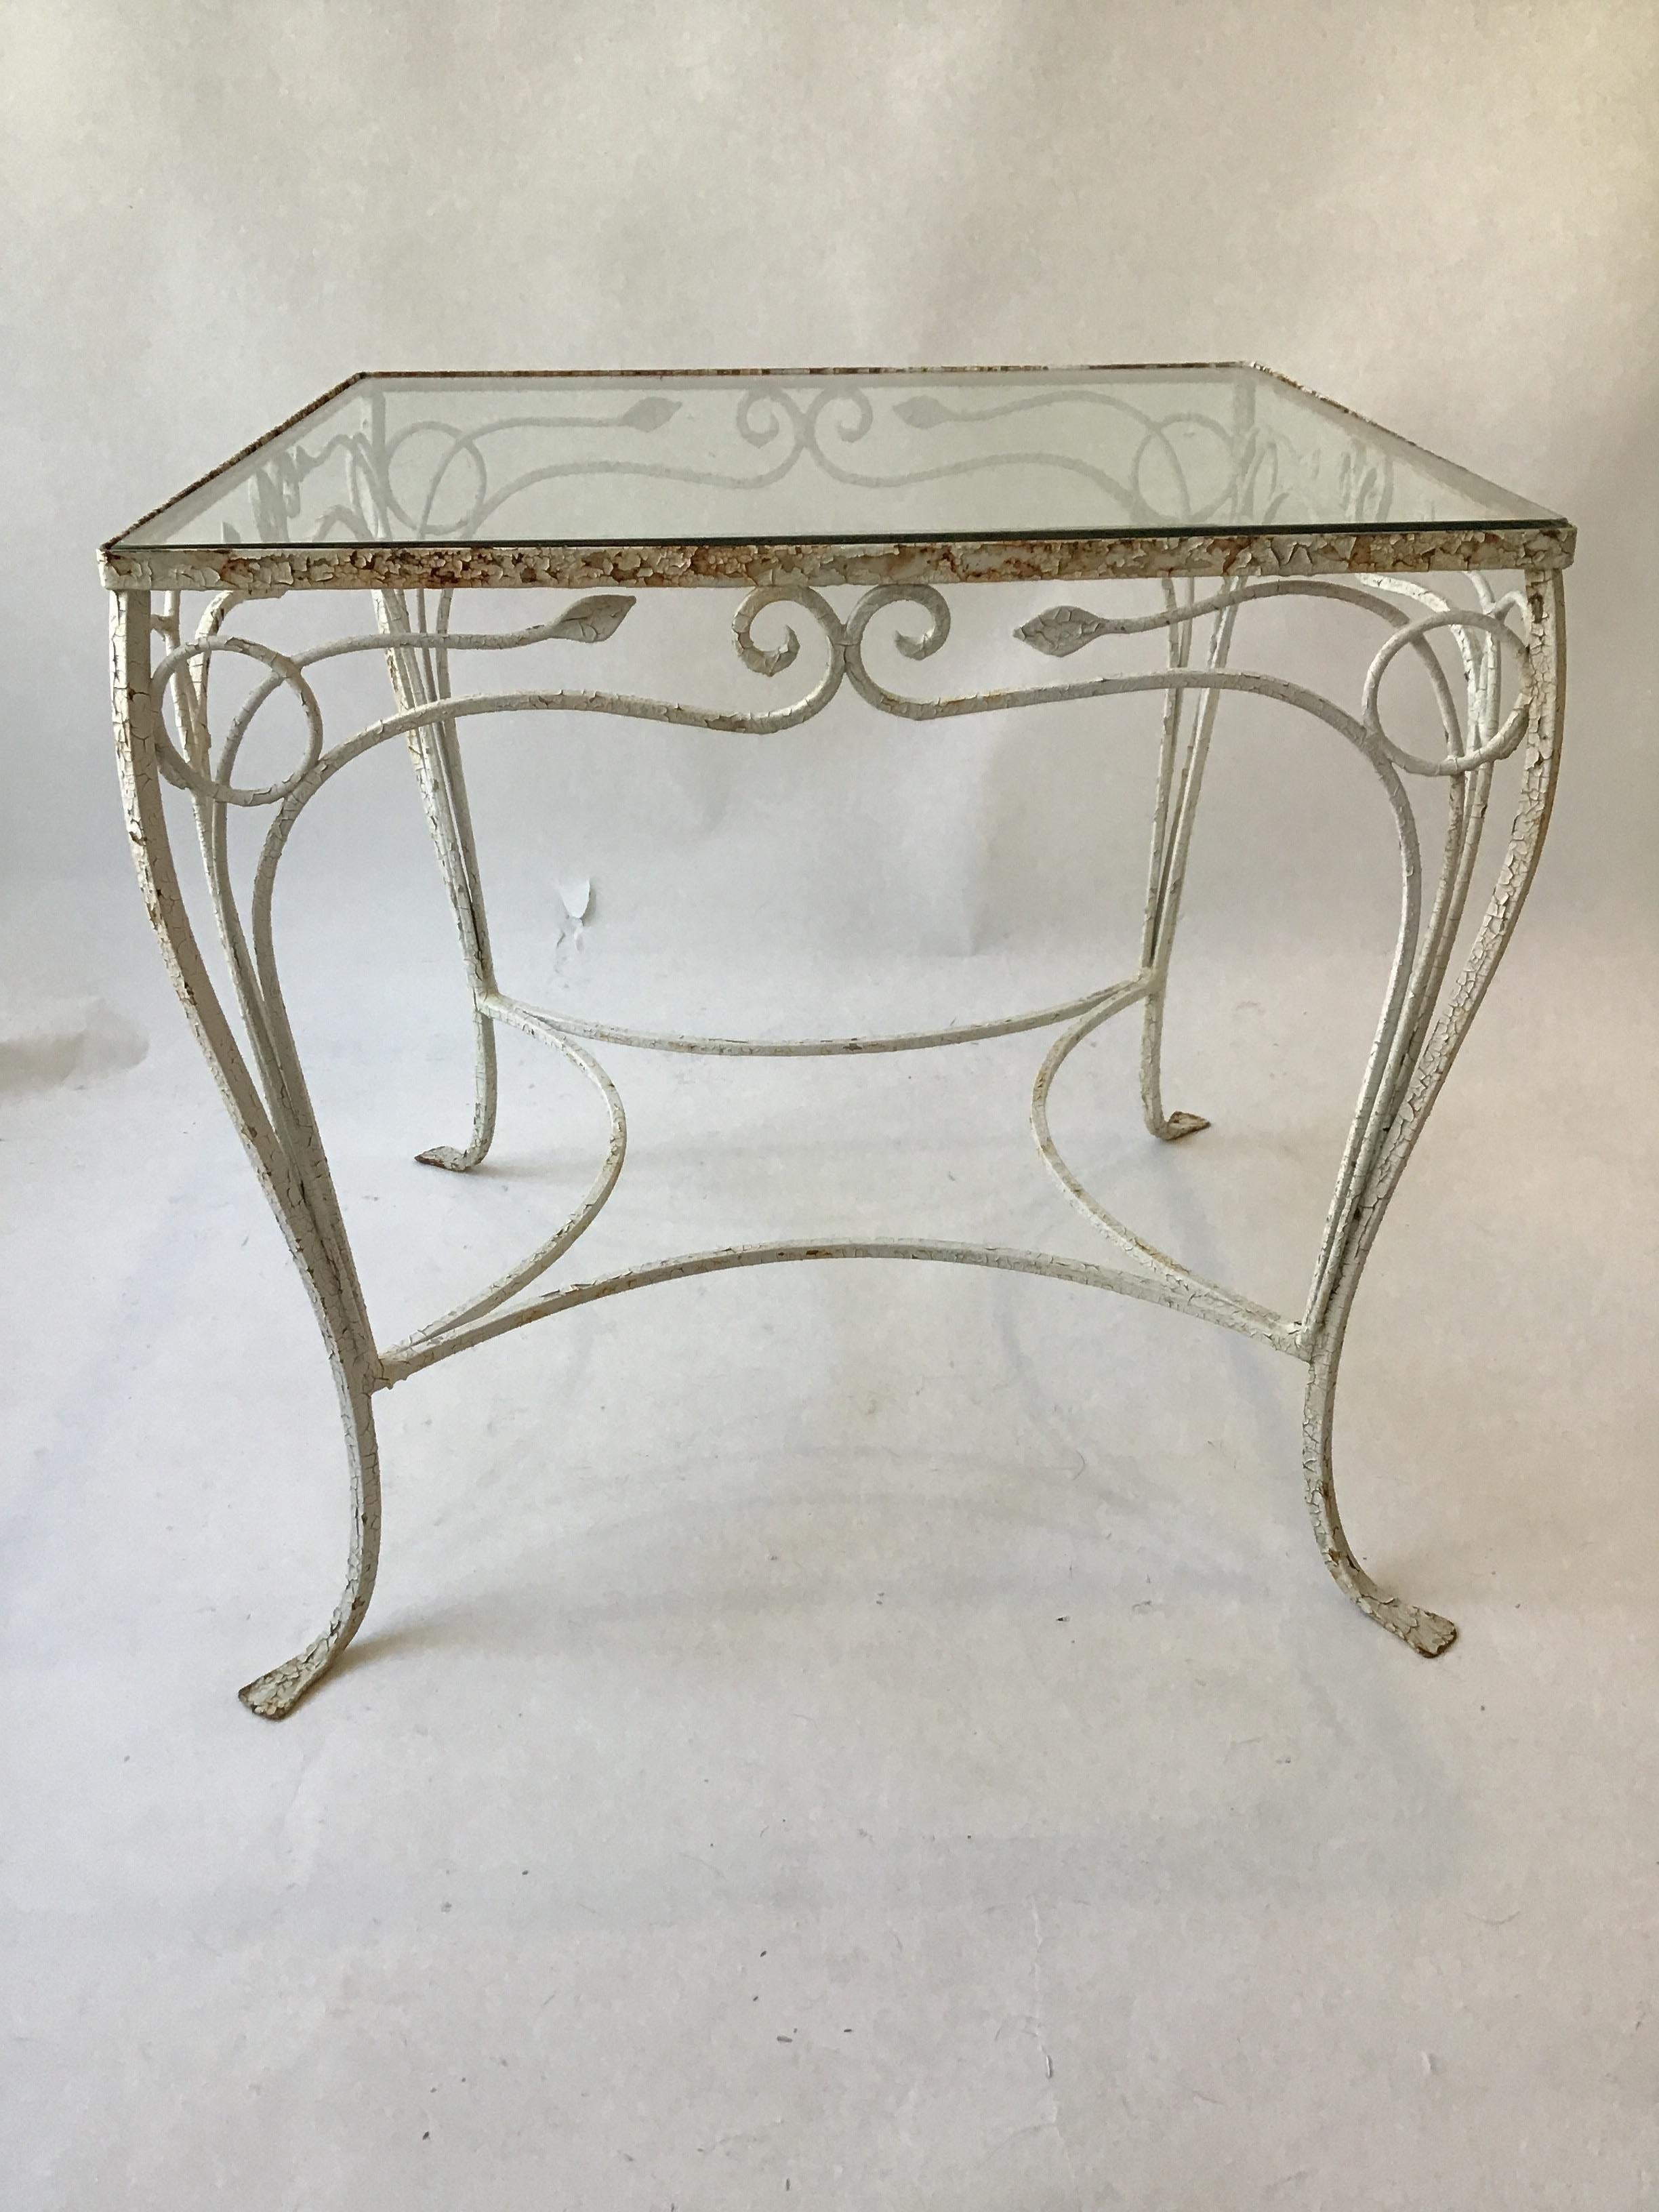 1950s Salterini wrought iron outdoor table. This table is the size of a card table.